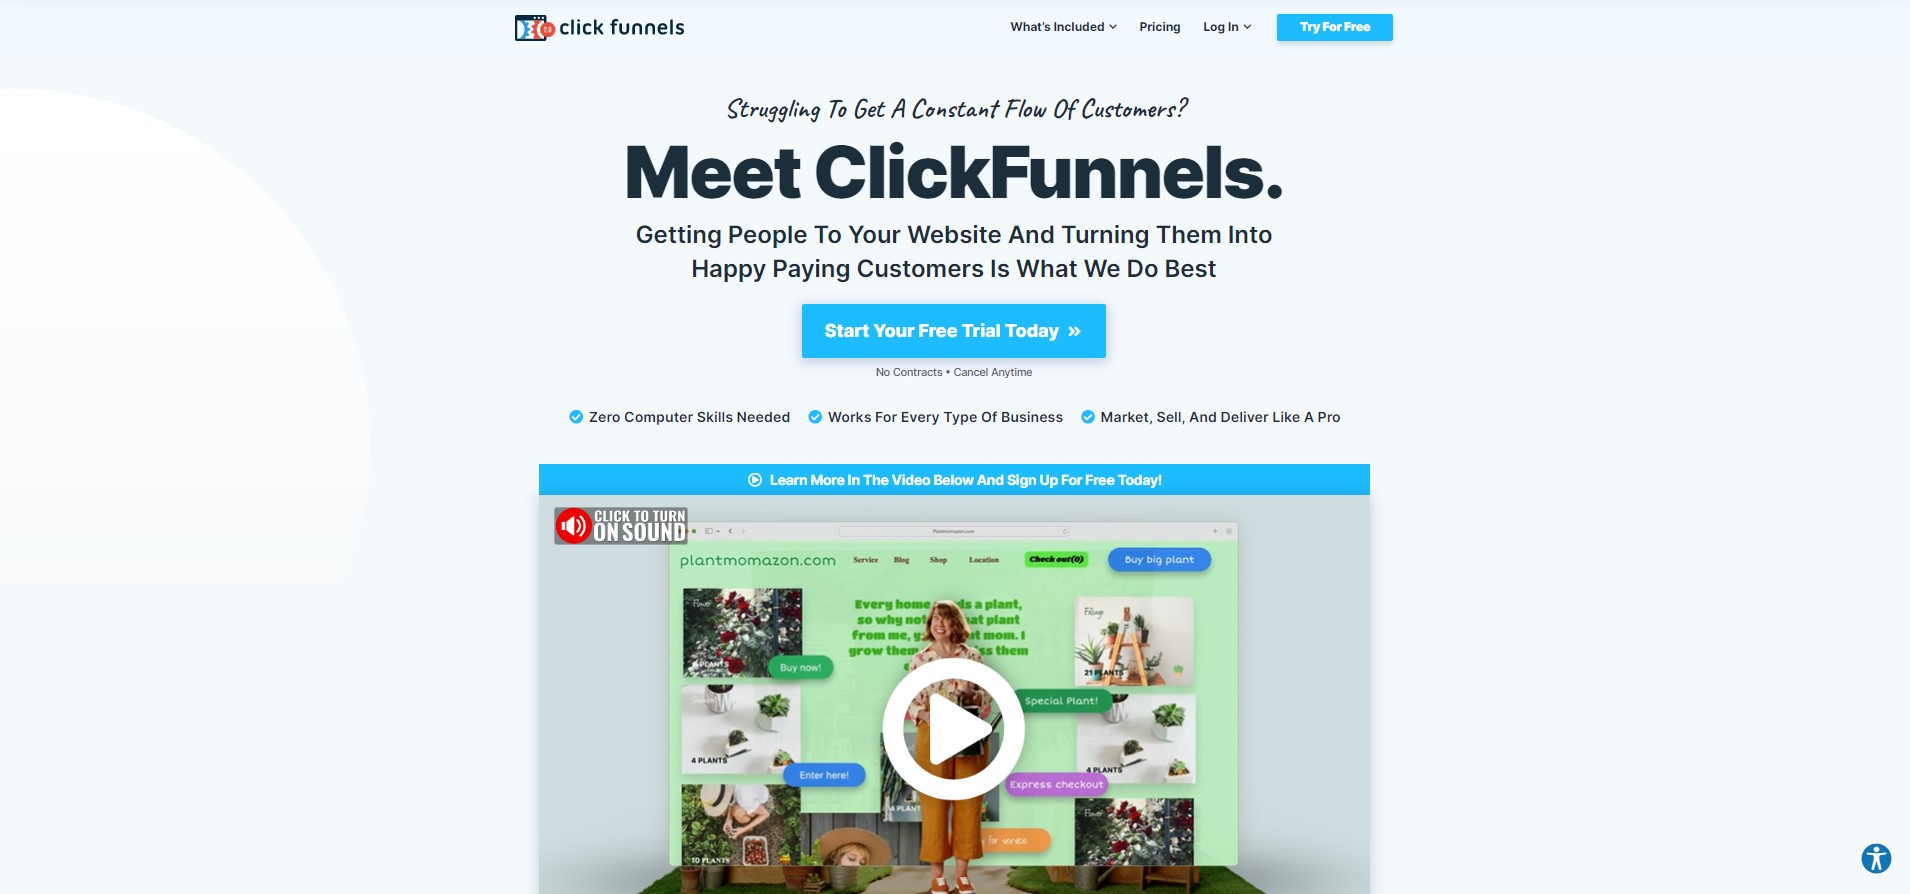 ClickFunnels page